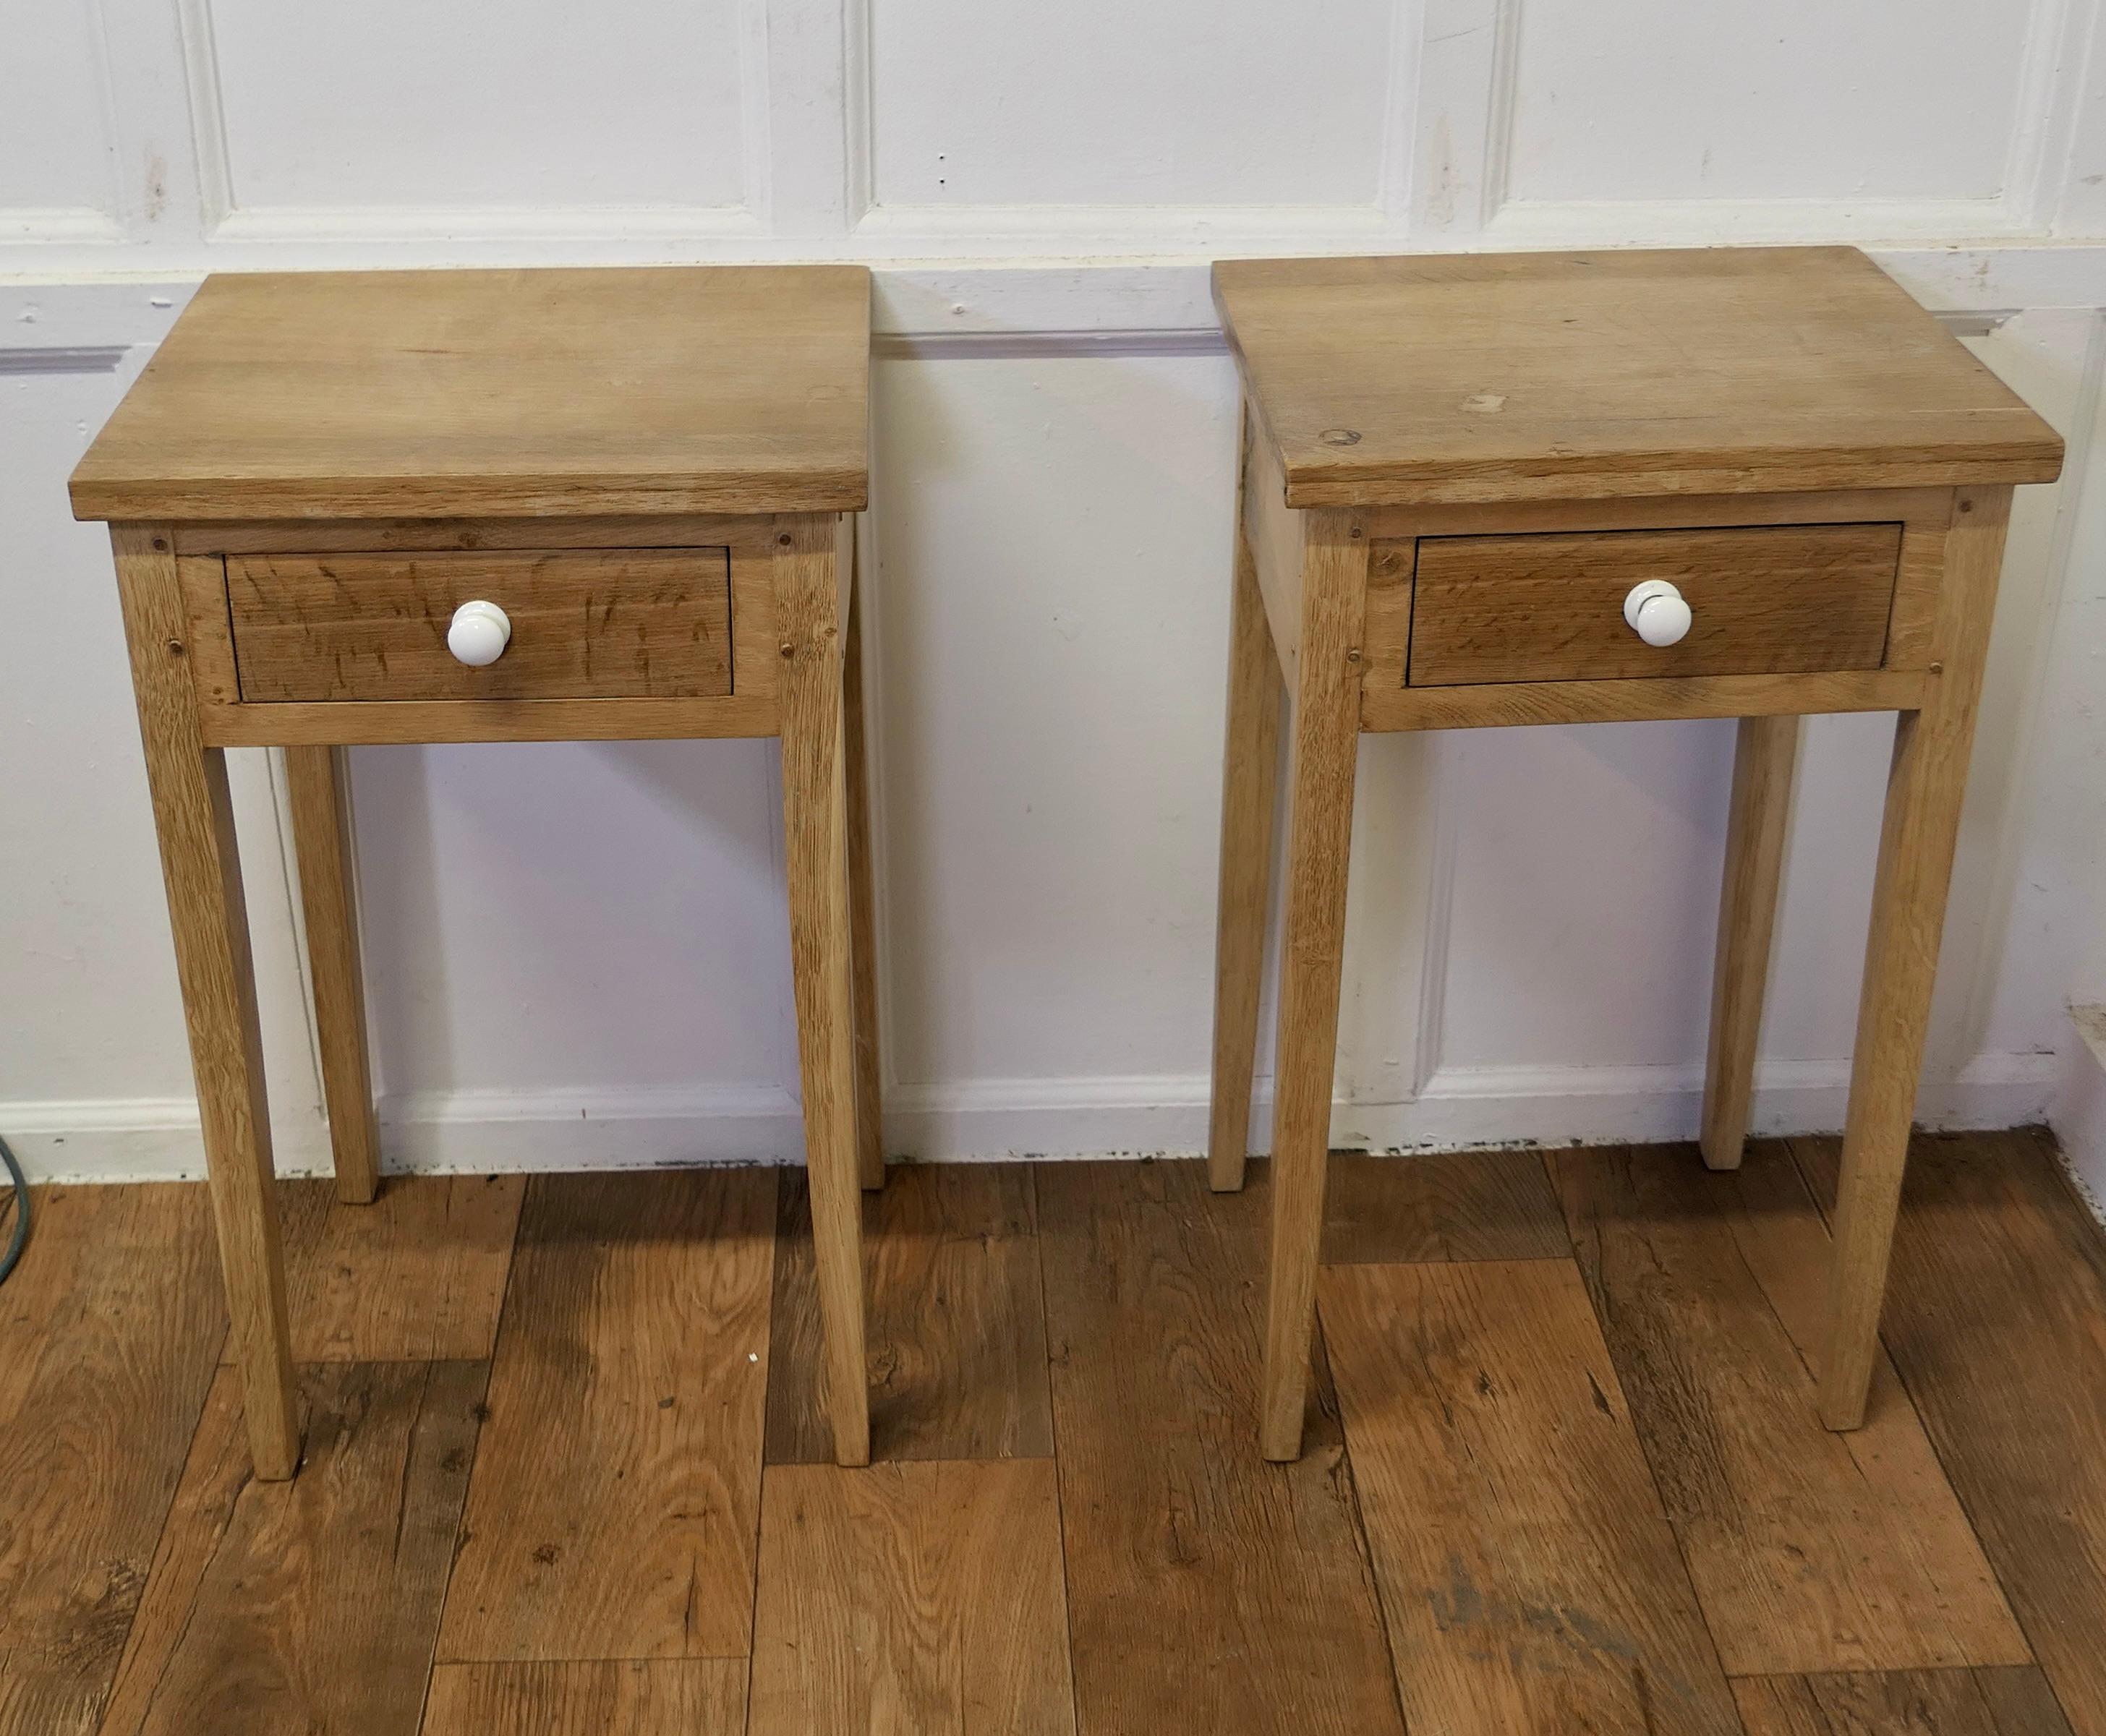  Pair of Bleached Oak Mid Century Bedside Tables  5